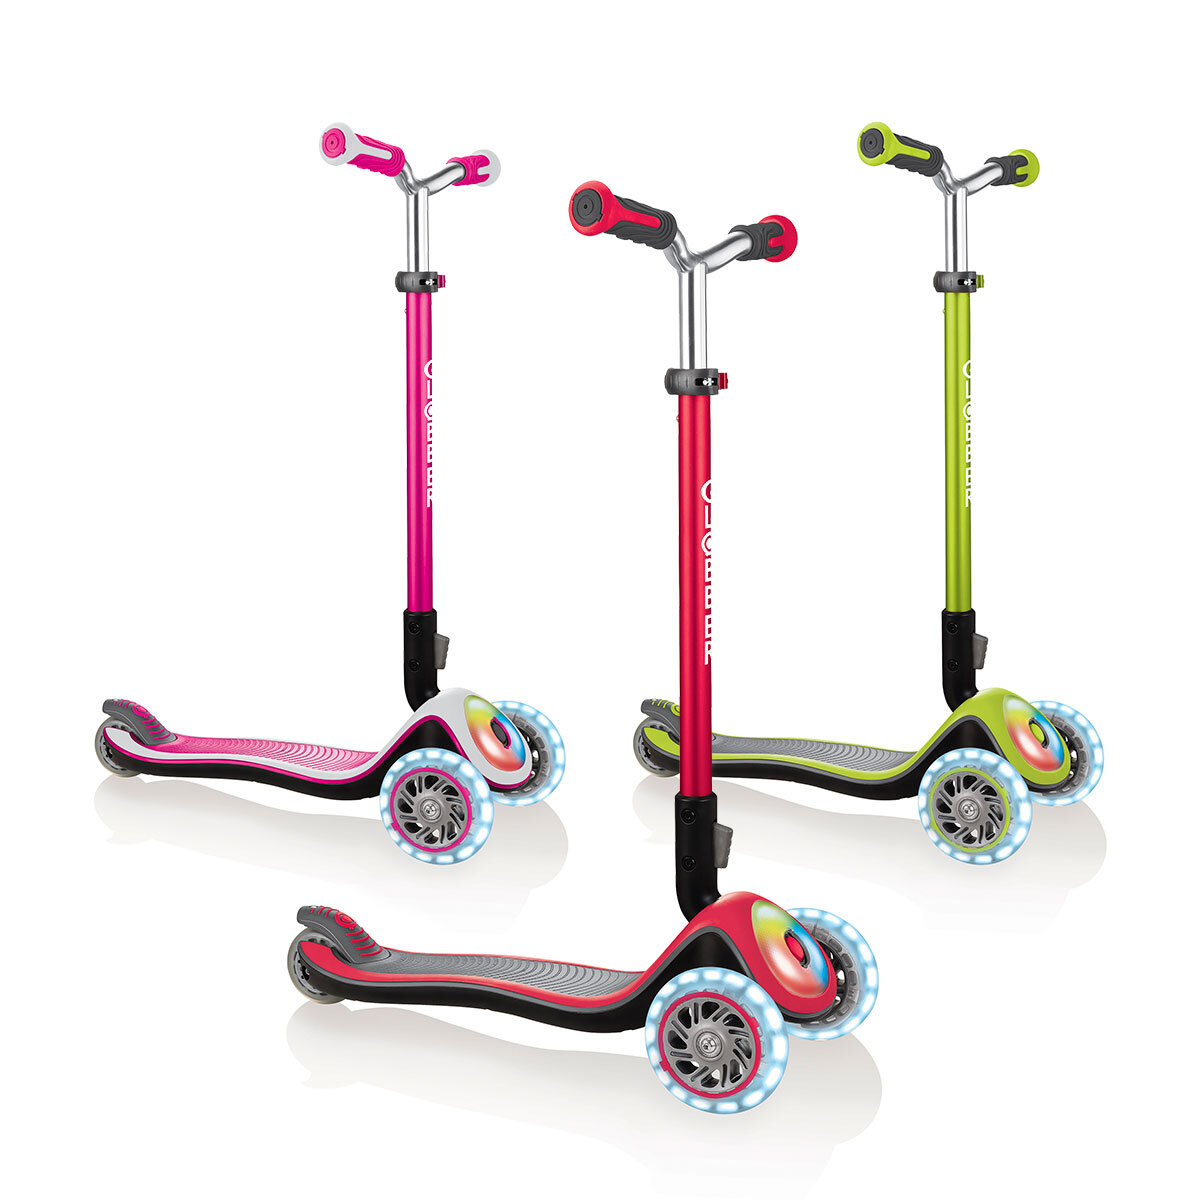 Buy Globber Elite Prime Scooter Combined Image at Costco.co.uk